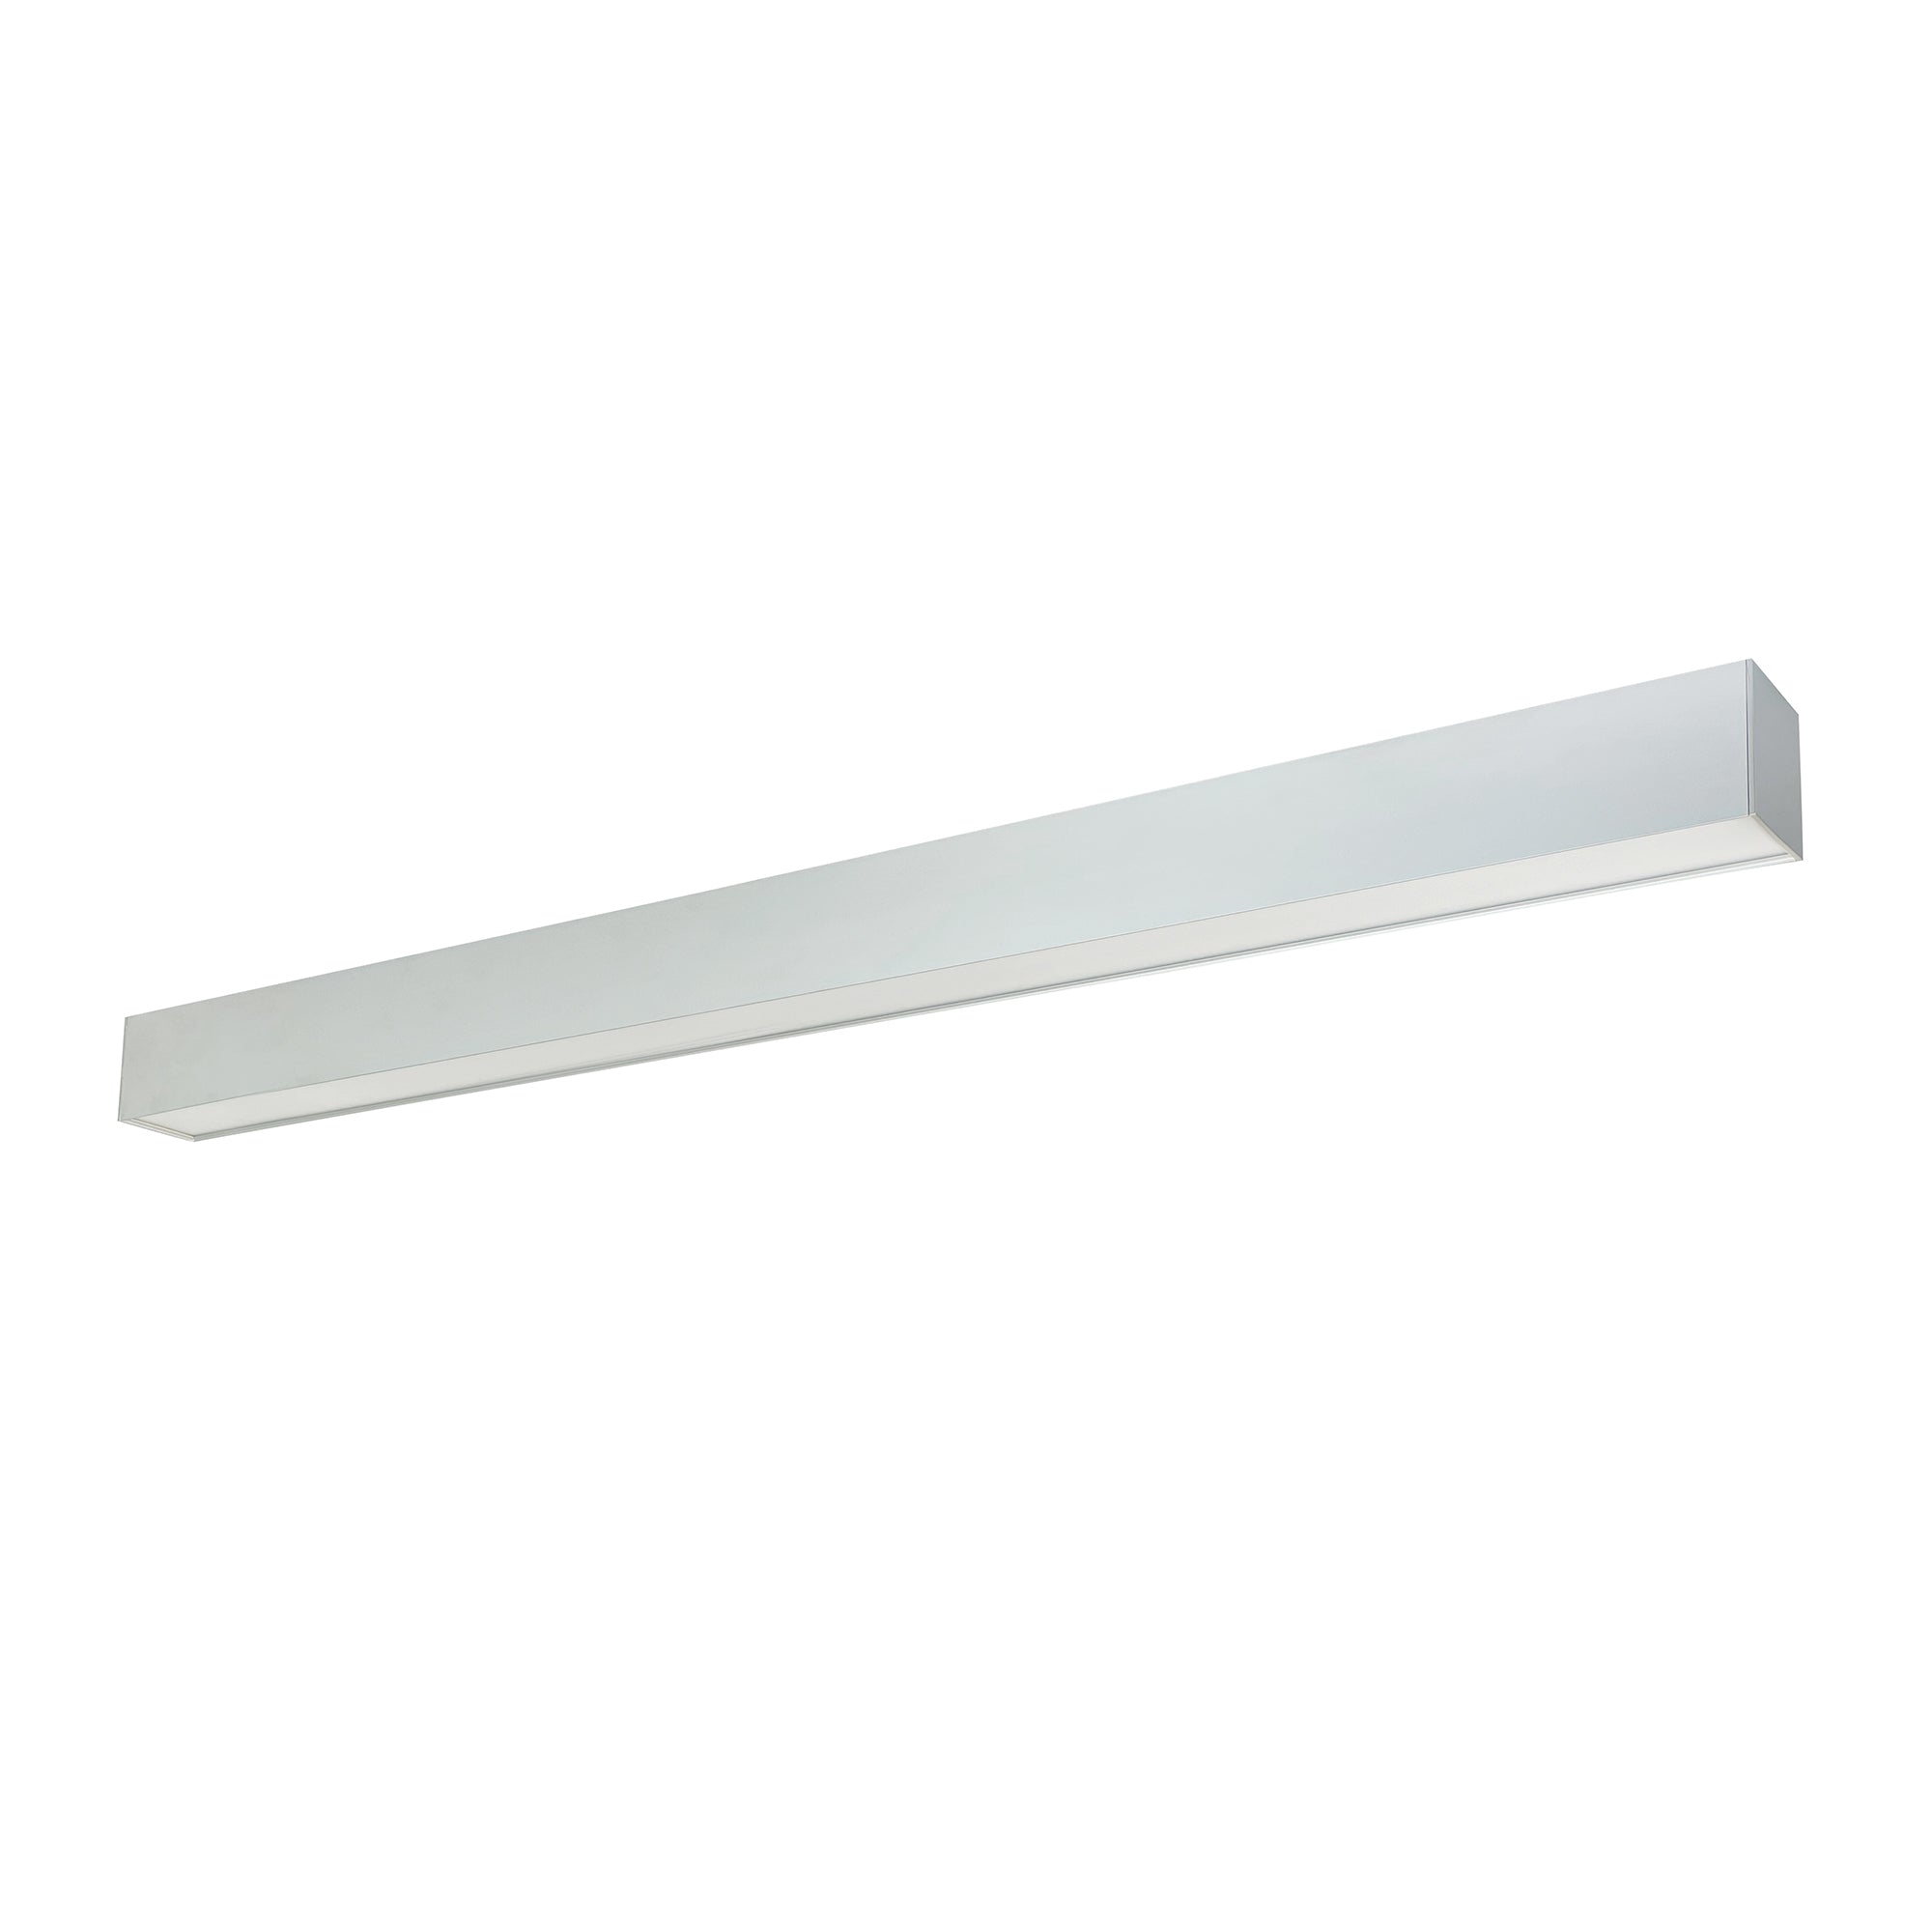 Nora Lighting NLUD-8334A - Linear - 8' L-Line LED Indirect/Direct Linear, 12304lm / Selectable CCT, Aluminum Finish